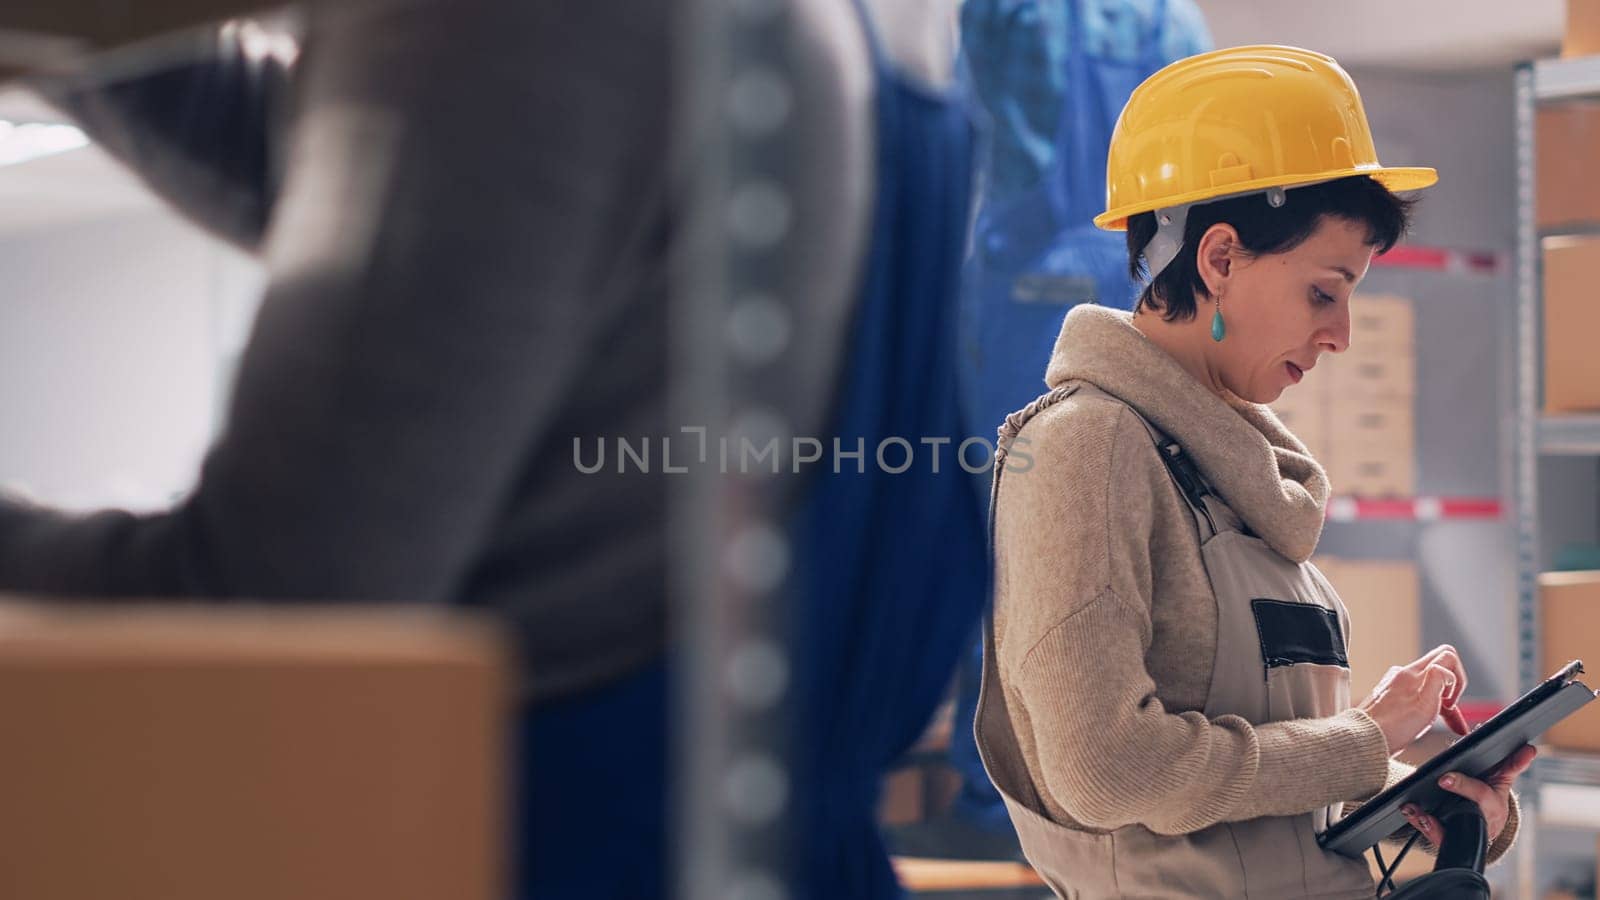 Young workers scanning products in storage room depot by DCStudio